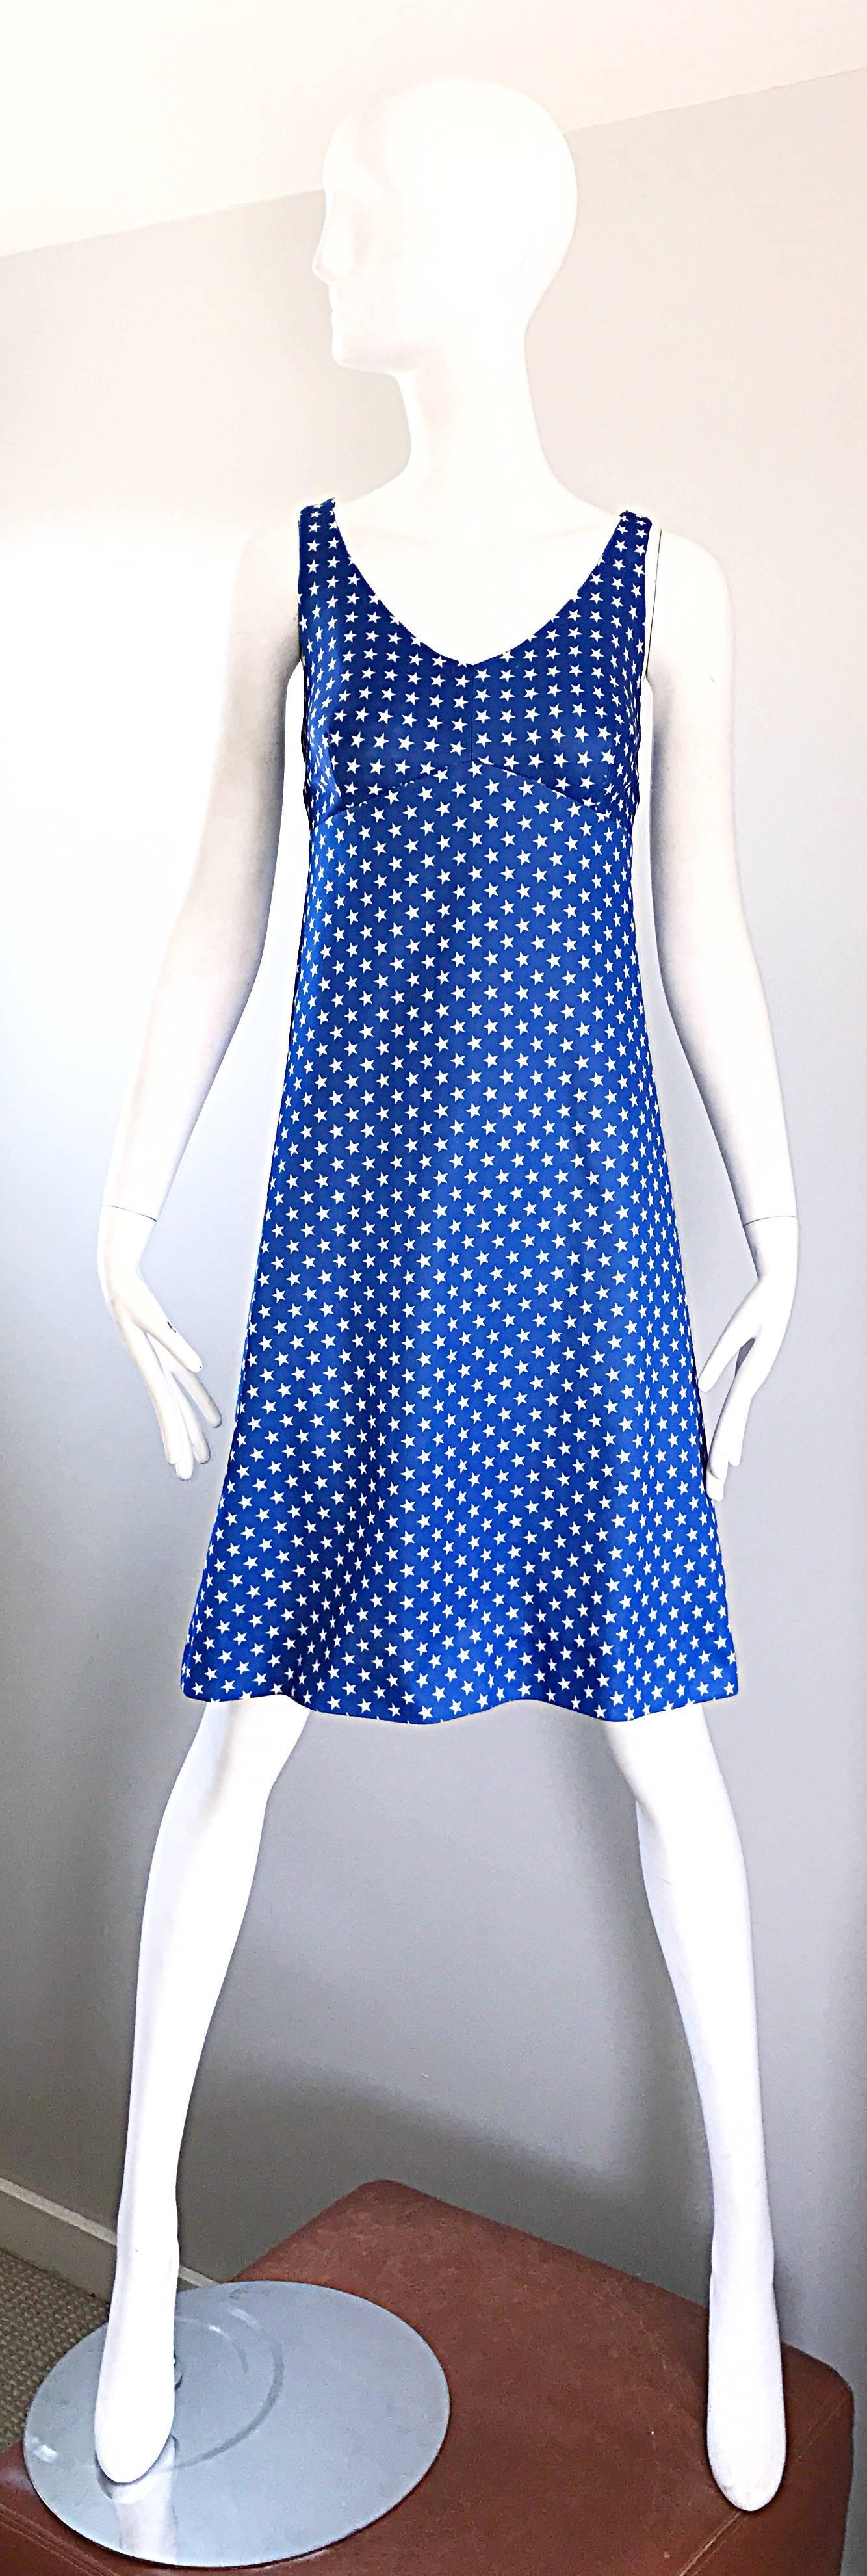 blue and white star dress